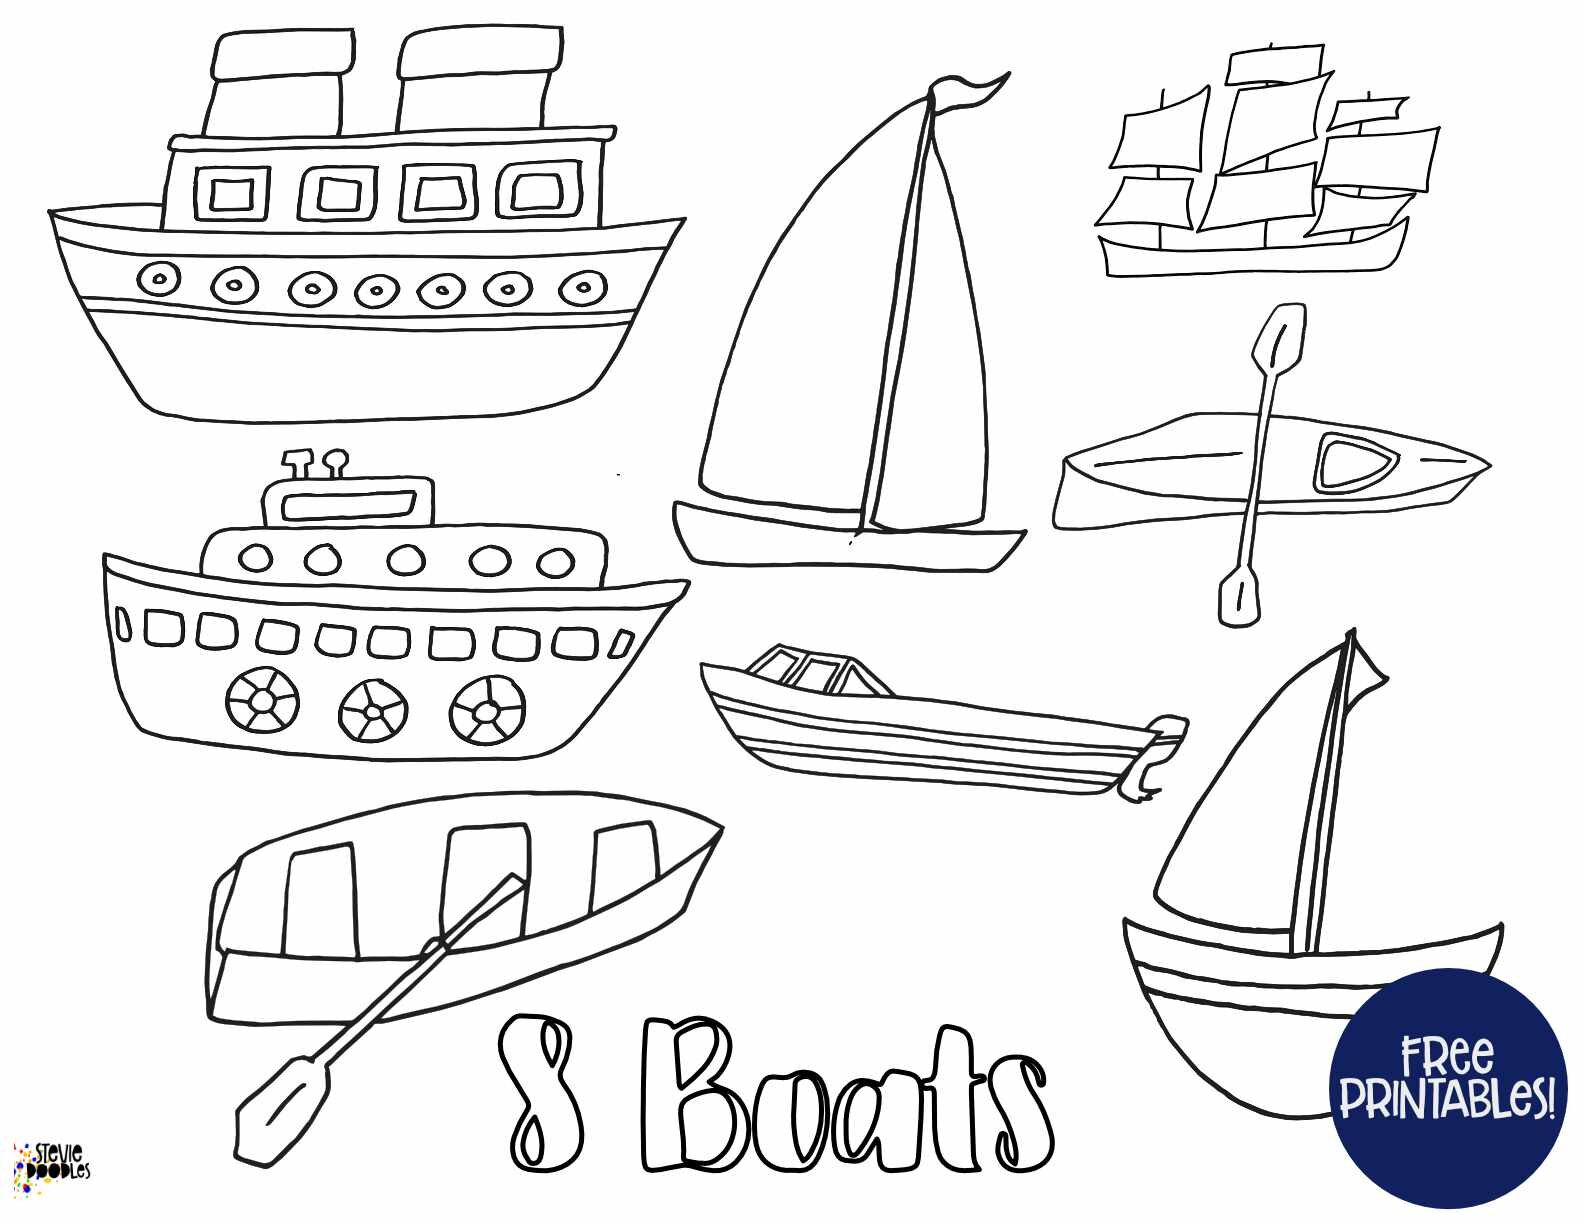 10 free vehicle coloring pages - cars, trucks, boats, helicopters, plans, buses! Numbers 1-10 for preschool/kindergarten